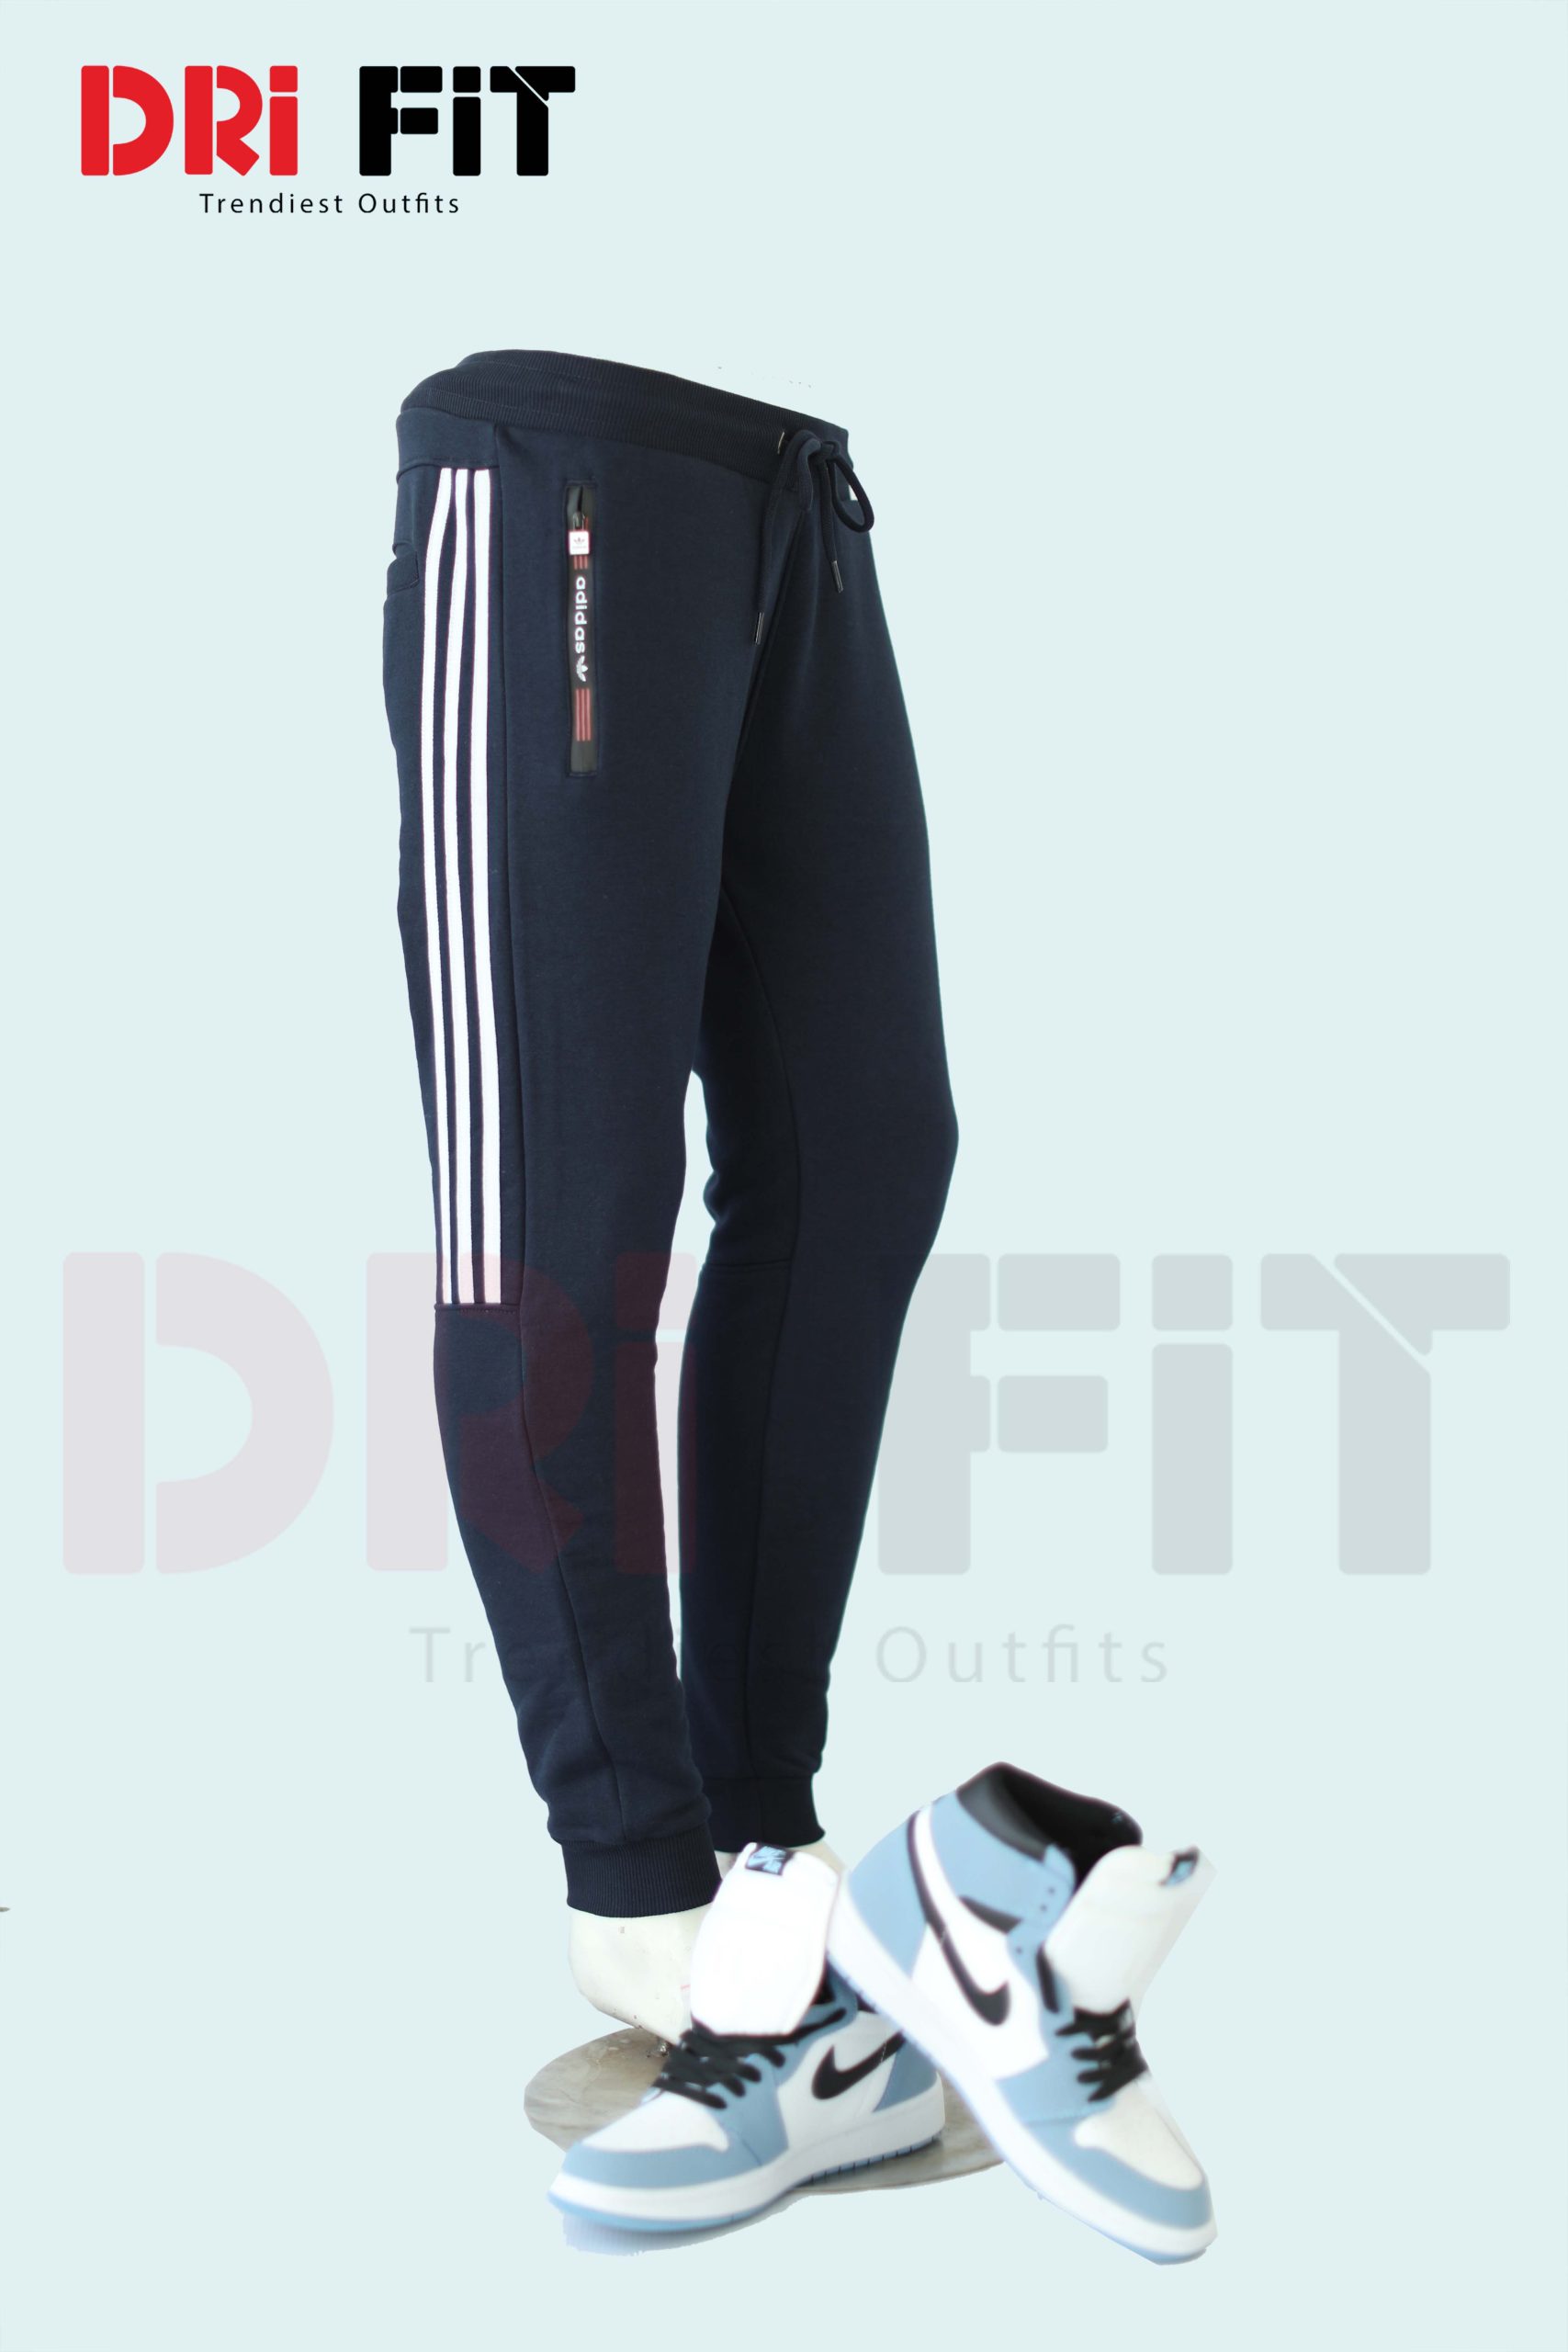 Adidas PREMIUM QUALITY CLOSE BOTTOM ZIP POCKETS PIQUE TROUSER FOR MEN available in Pakistan